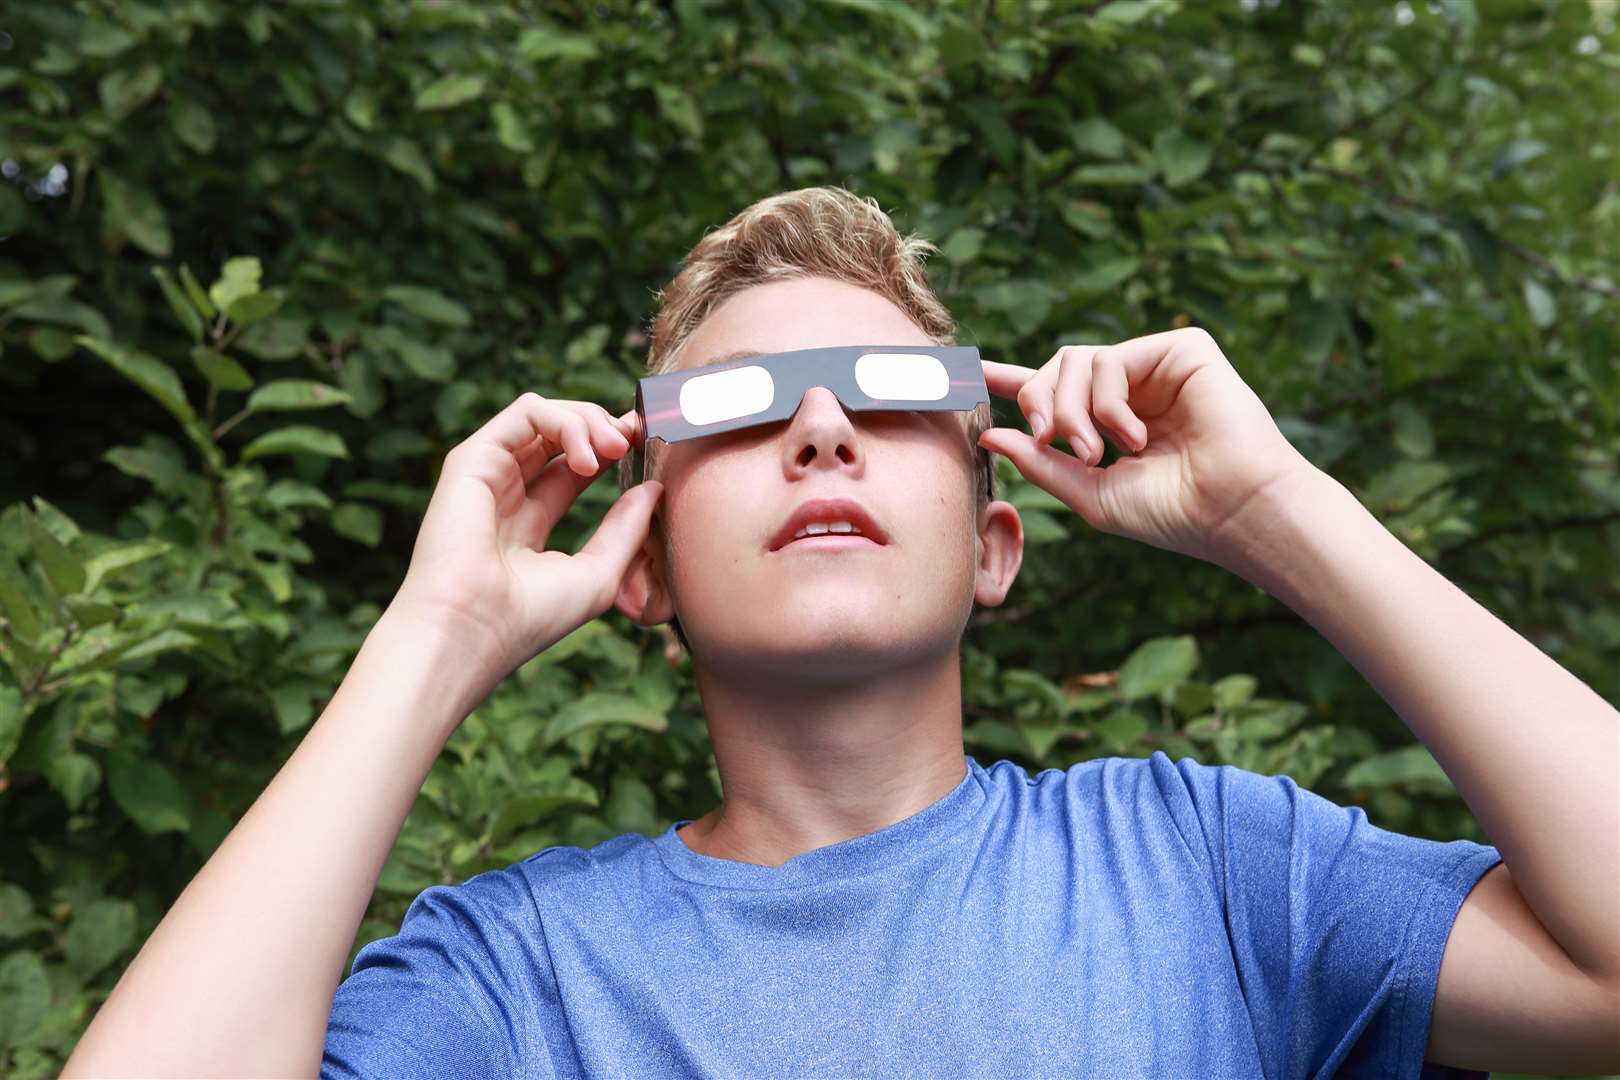 Eclipse glasses with a certified safety mark can also be used to view the partial solar eclipse